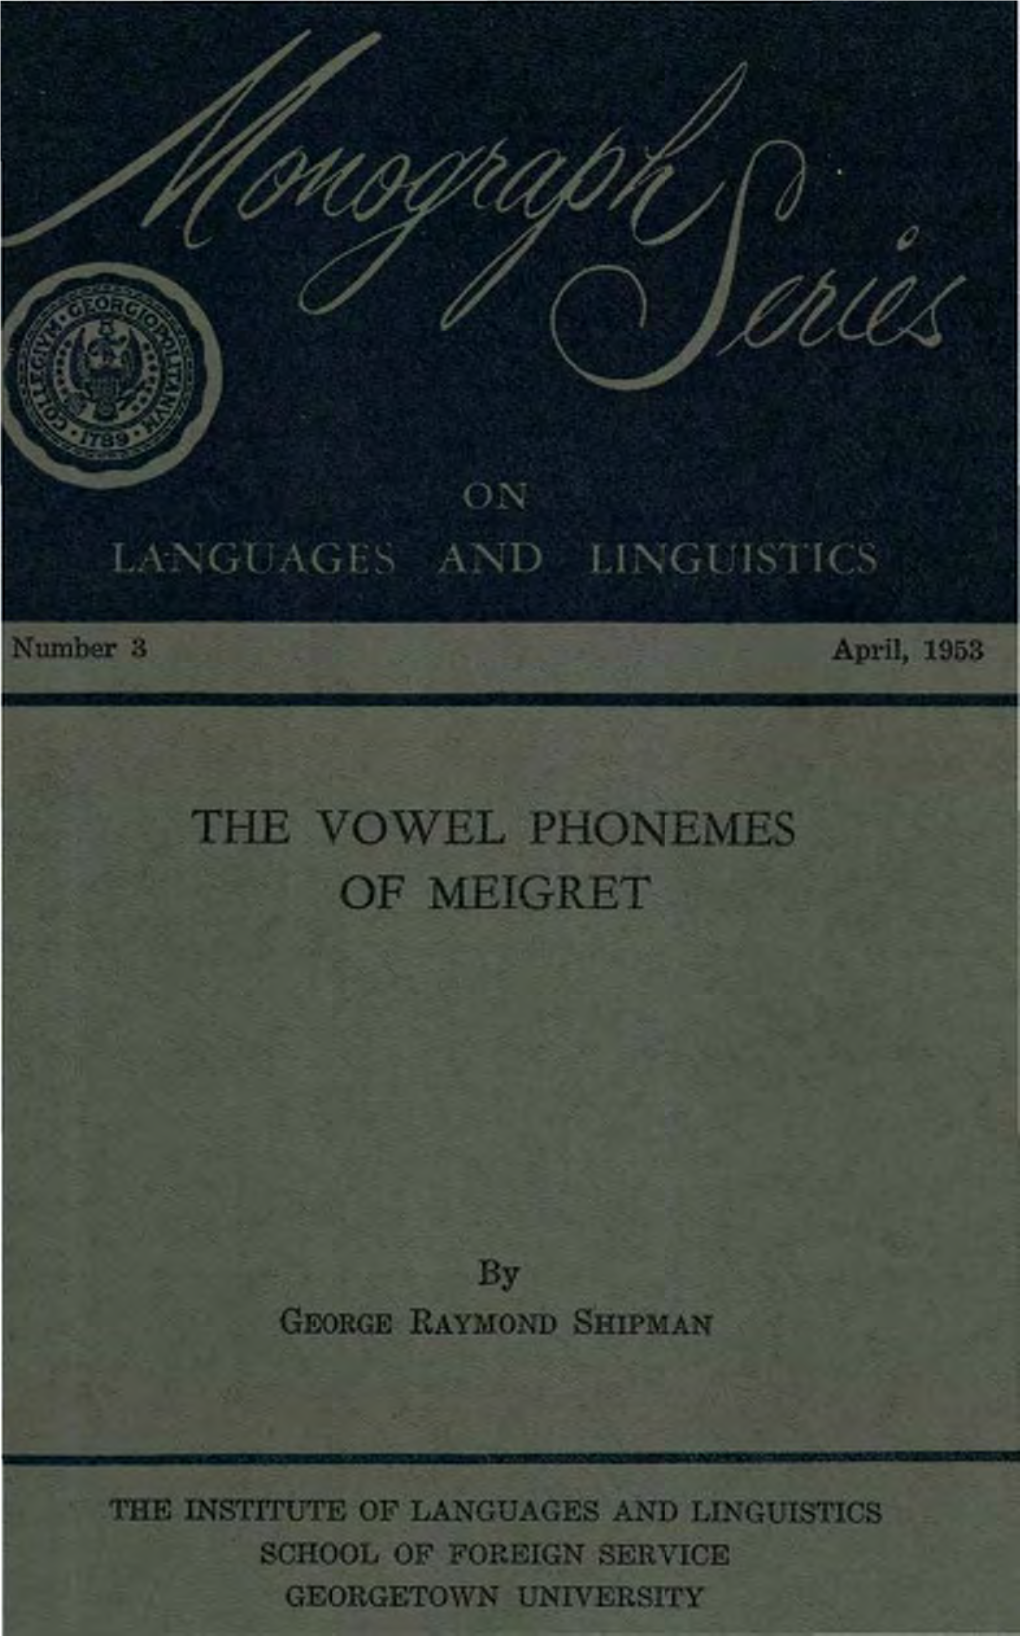 The Vowel Phonemes of Meigret